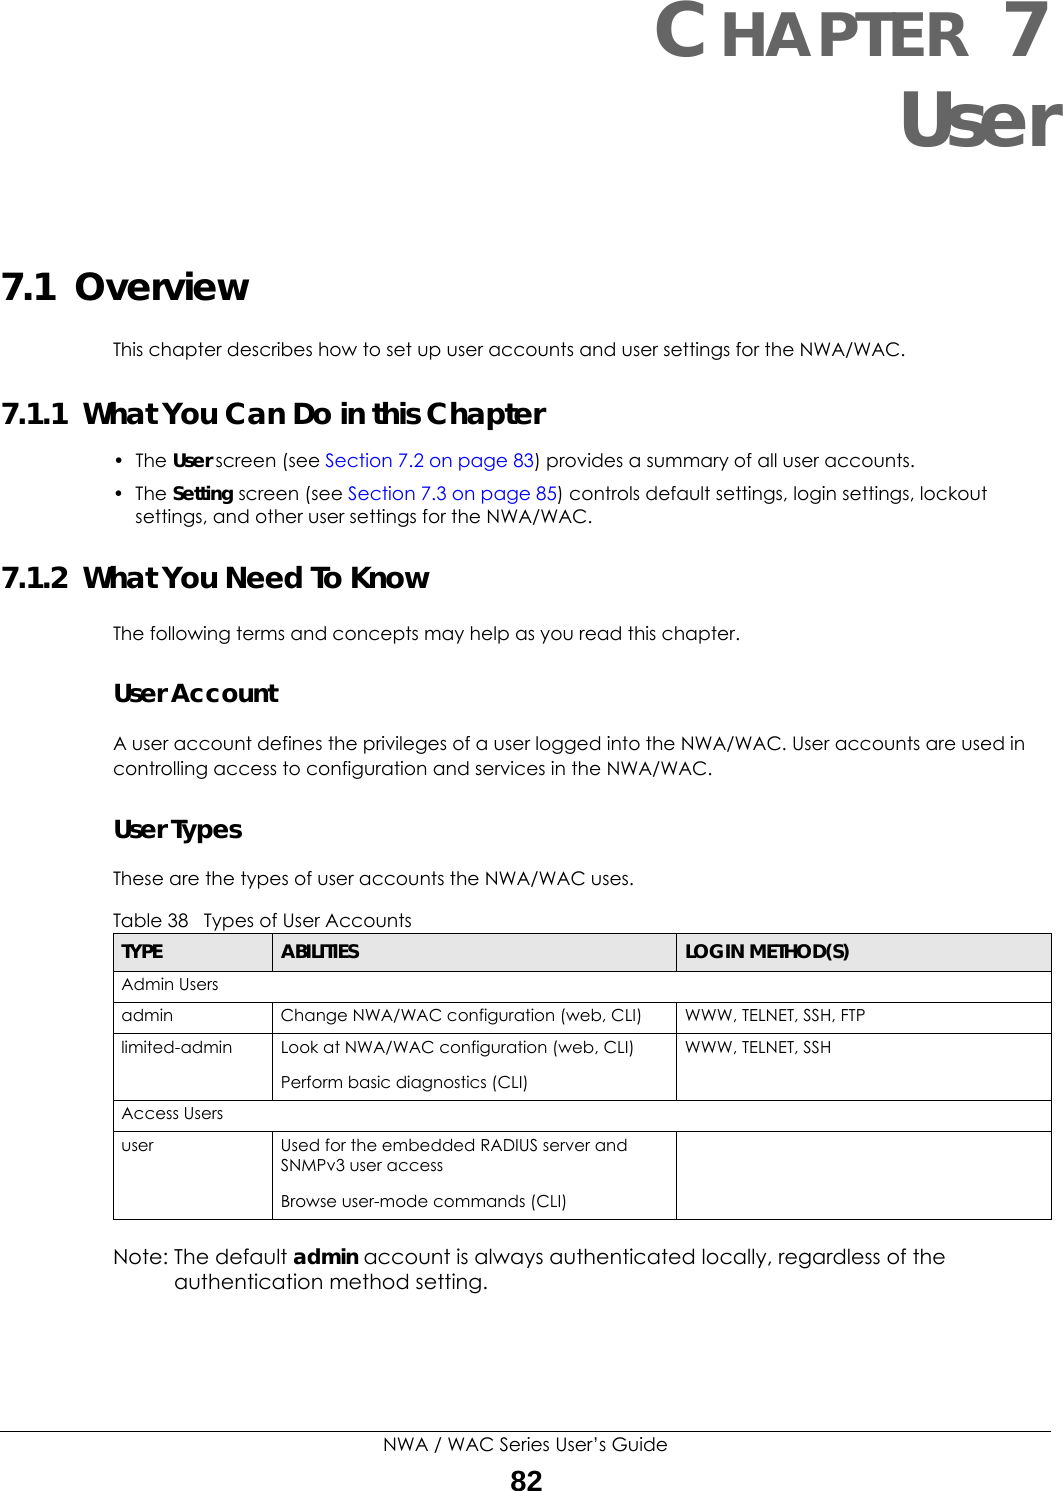 NWA / WAC Series User’s Guide82CHAPTER 7User7.1  OverviewThis chapter describes how to set up user accounts and user settings for the NWA/WAC. 7.1.1  What You Can Do in this Chapter• The User screen (see Section 7.2 on page 83) provides a summary of all user accounts.•The Setting screen (see Section 7.3 on page 85) controls default settings, login settings, lockout settings, and other user settings for the NWA/WAC. 7.1.2  What You Need To KnowThe following terms and concepts may help as you read this chapter.User AccountA user account defines the privileges of a user logged into the NWA/WAC. User accounts are used in controlling access to configuration and services in the NWA/WAC.User TypesThese are the types of user accounts the NWA/WAC uses.  Note: The default admin account is always authenticated locally, regardless of the authentication method setting.Table 38   Types of User AccountsTYPE ABILITIES LOGIN METHOD(S)Admin Usersadmin Change NWA/WAC configuration (web, CLI) WWW, TELNET, SSH, FTPlimited-admin Look at NWA/WAC configuration (web, CLI)Perform basic diagnostics (CLI)WWW, TELNET, SSHAccess Usersuser Used for the embedded RADIUS server and SNMPv3 user accessBrowse user-mode commands (CLI)